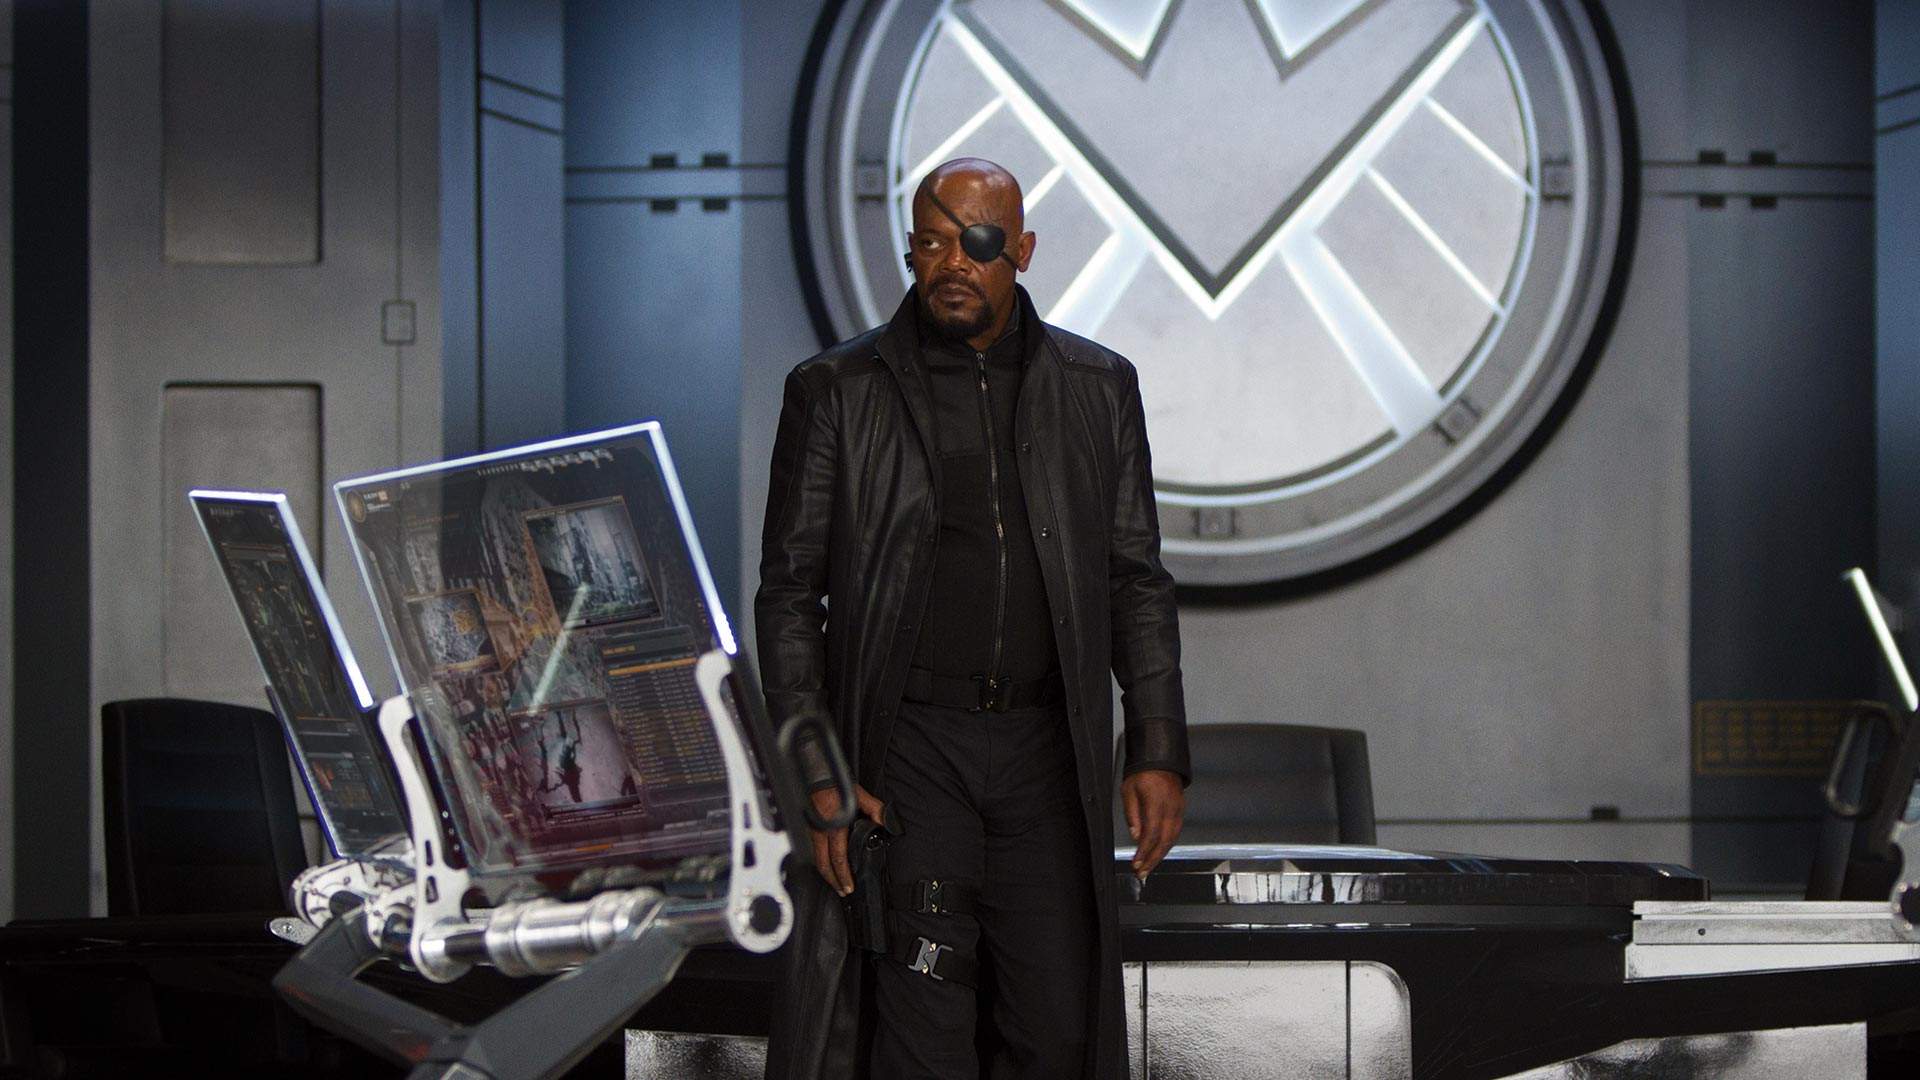 Samuel L Jackson Looks Set to Score His Own Marvel Streaming Series About Nick Fury